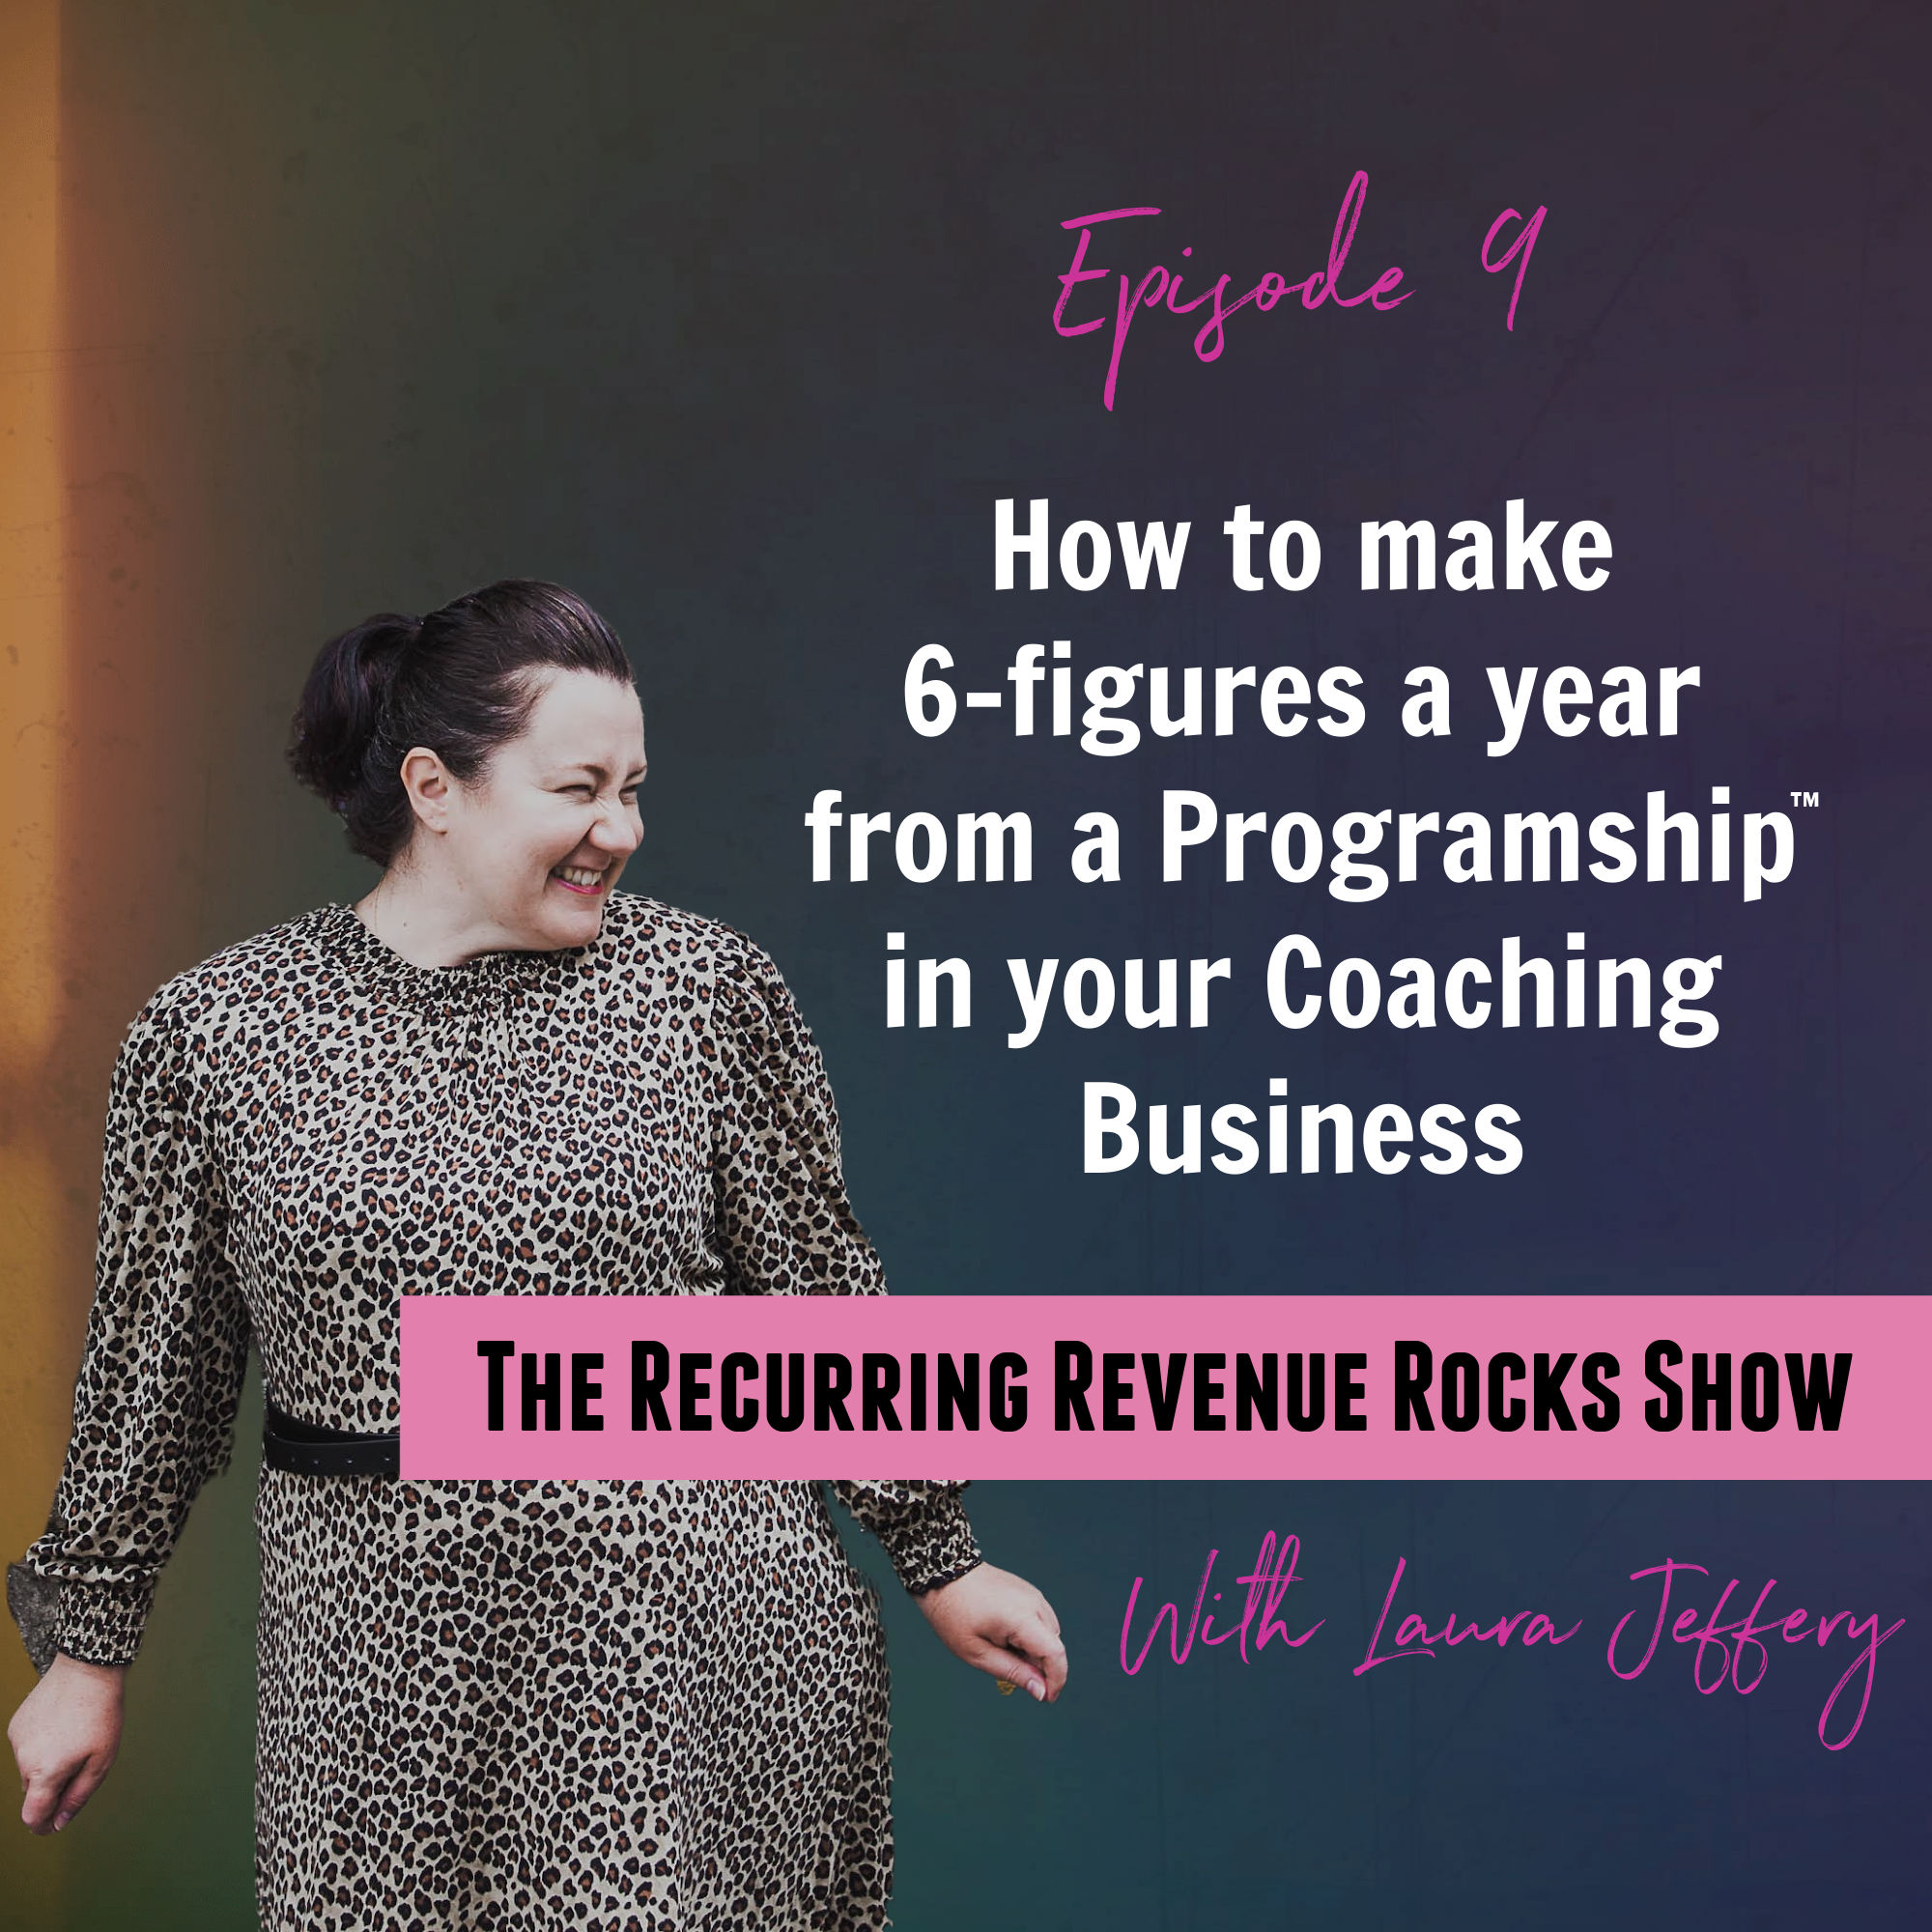 How to add an extra 6-figures to your Coaching Business each year with a Programship®